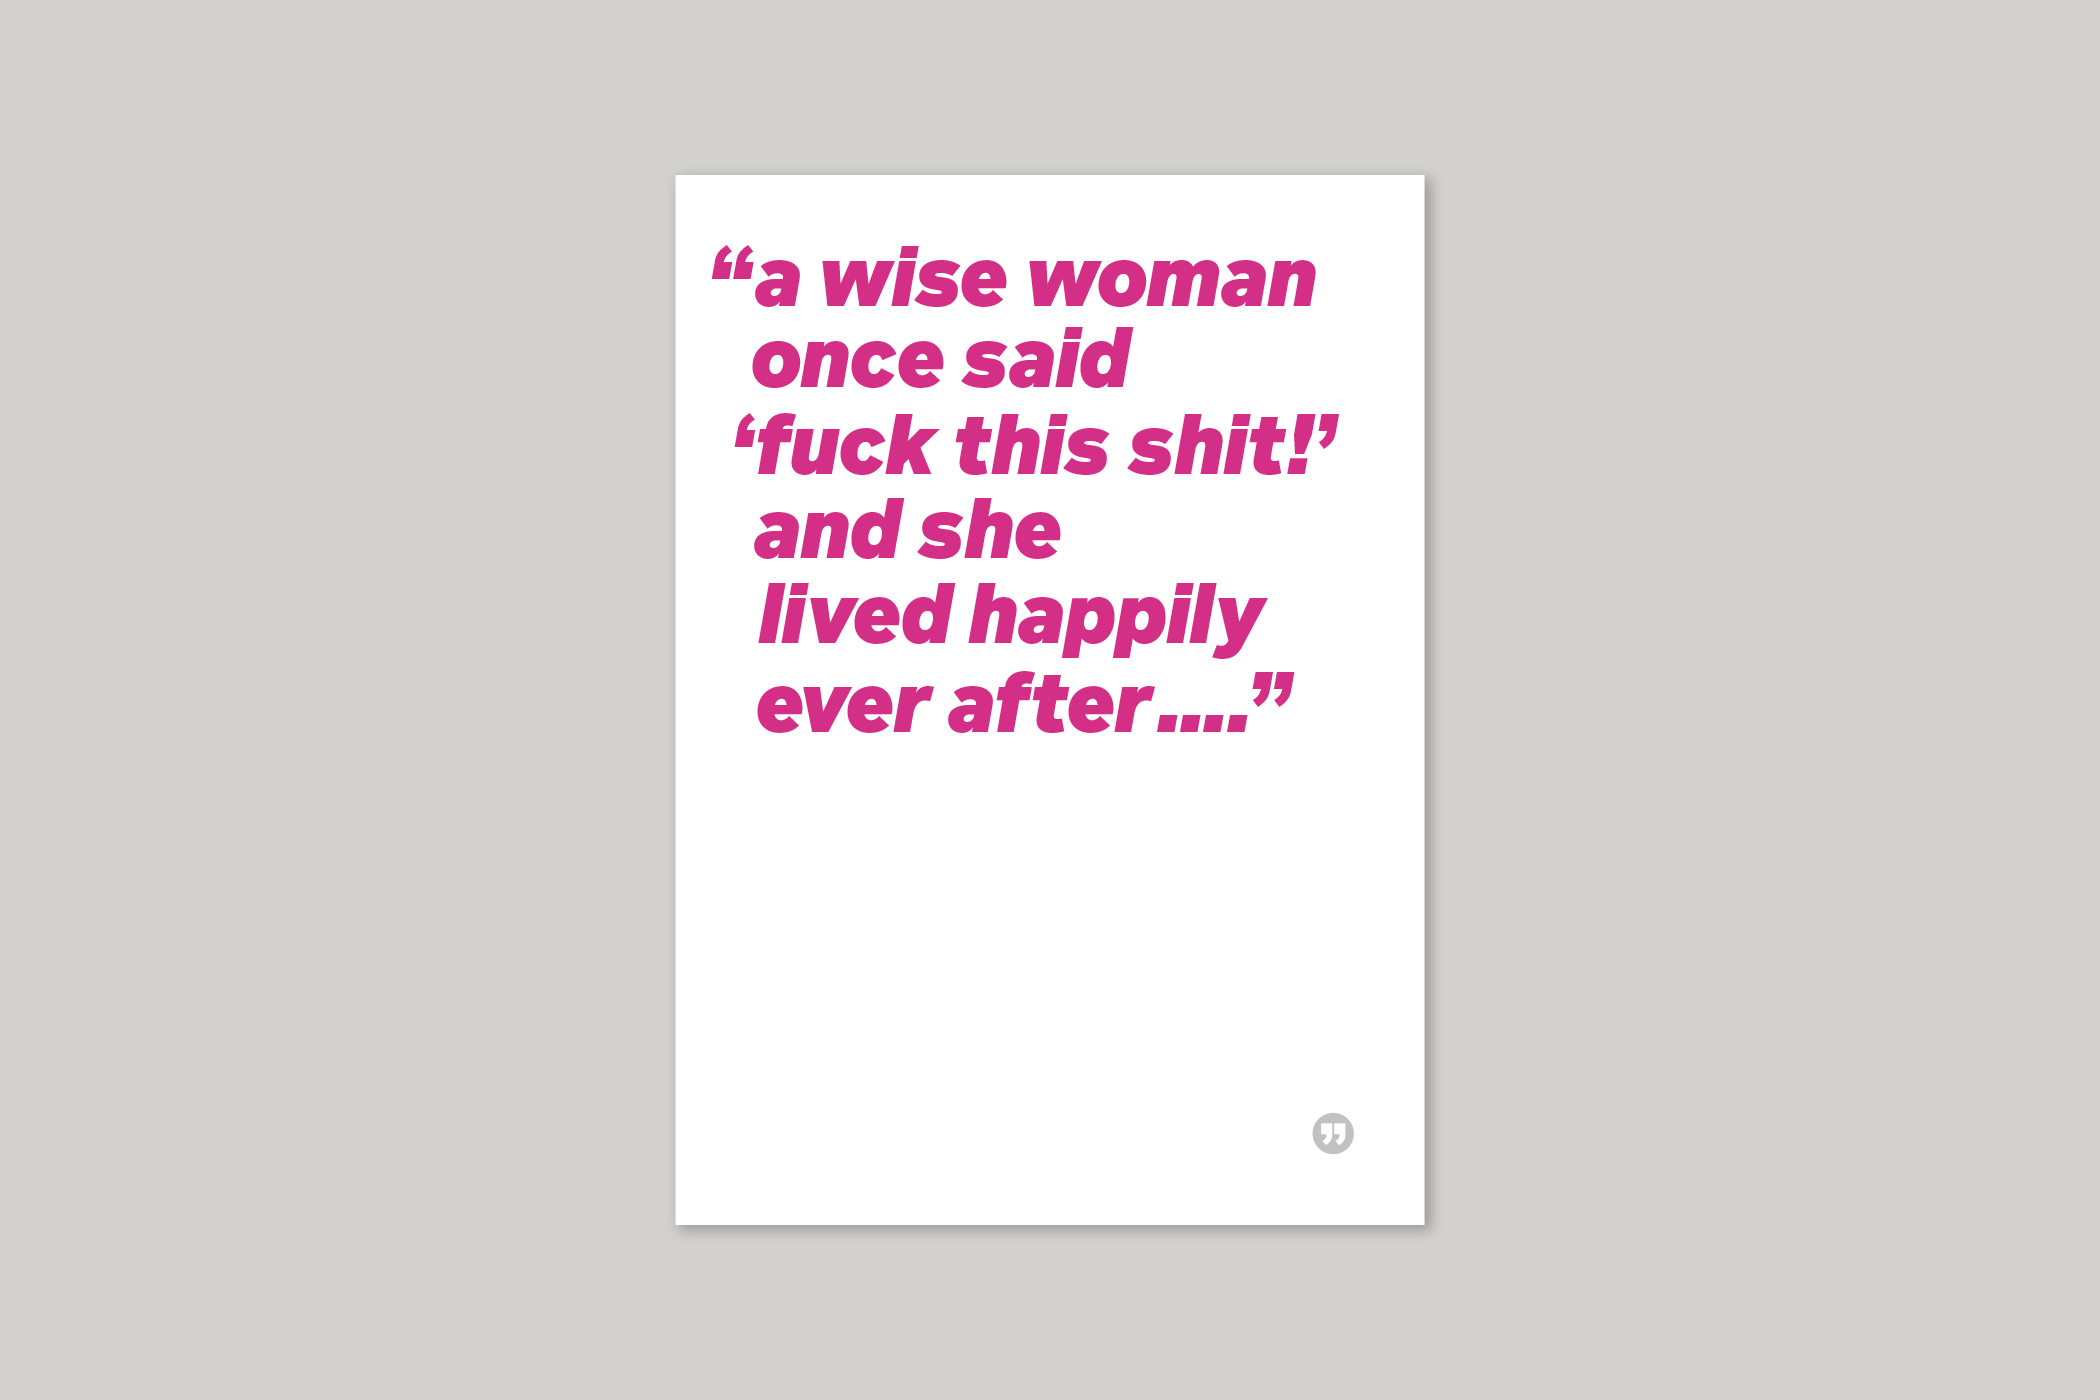 Wise Woman funny quotation from Quotecards range of cards by Icon.